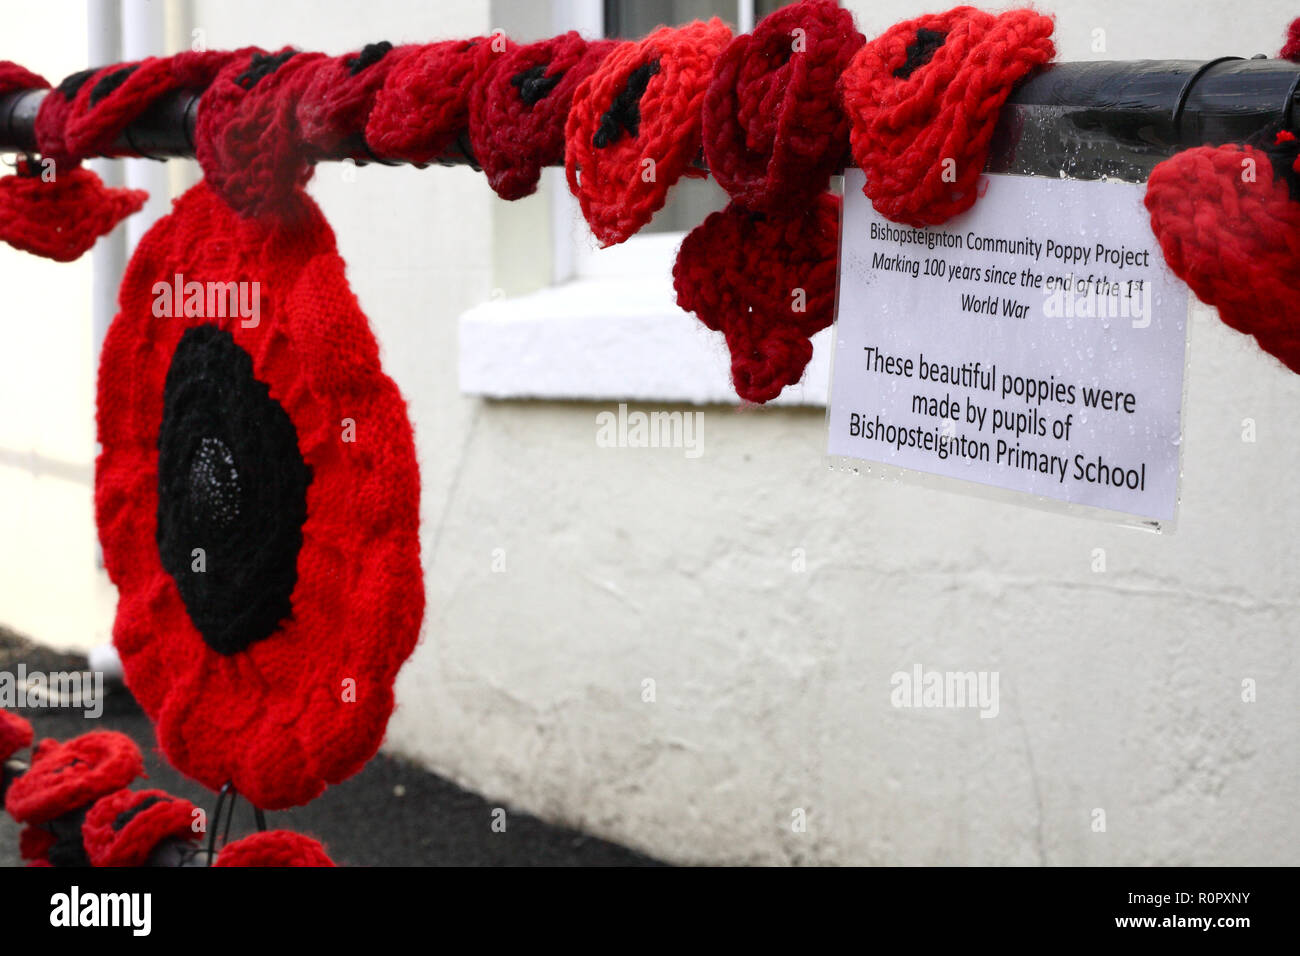 Bishopsteignton Village, South Devon. 7th Nov 2018. Bishopsteignton Village have come together with community groups including the local school, Scouts and Brownies to knit and crochet over 2,500 poppies to mark the end of World War 1. The poppies are adorning railings, gates and even bollards through the village to create a striking display to commemorate the 100 years since the end of WW1. Credit: Vicki Gardner/Alamy Live News Credit: Vicki Gardner/Alamy Live News Stock Photo